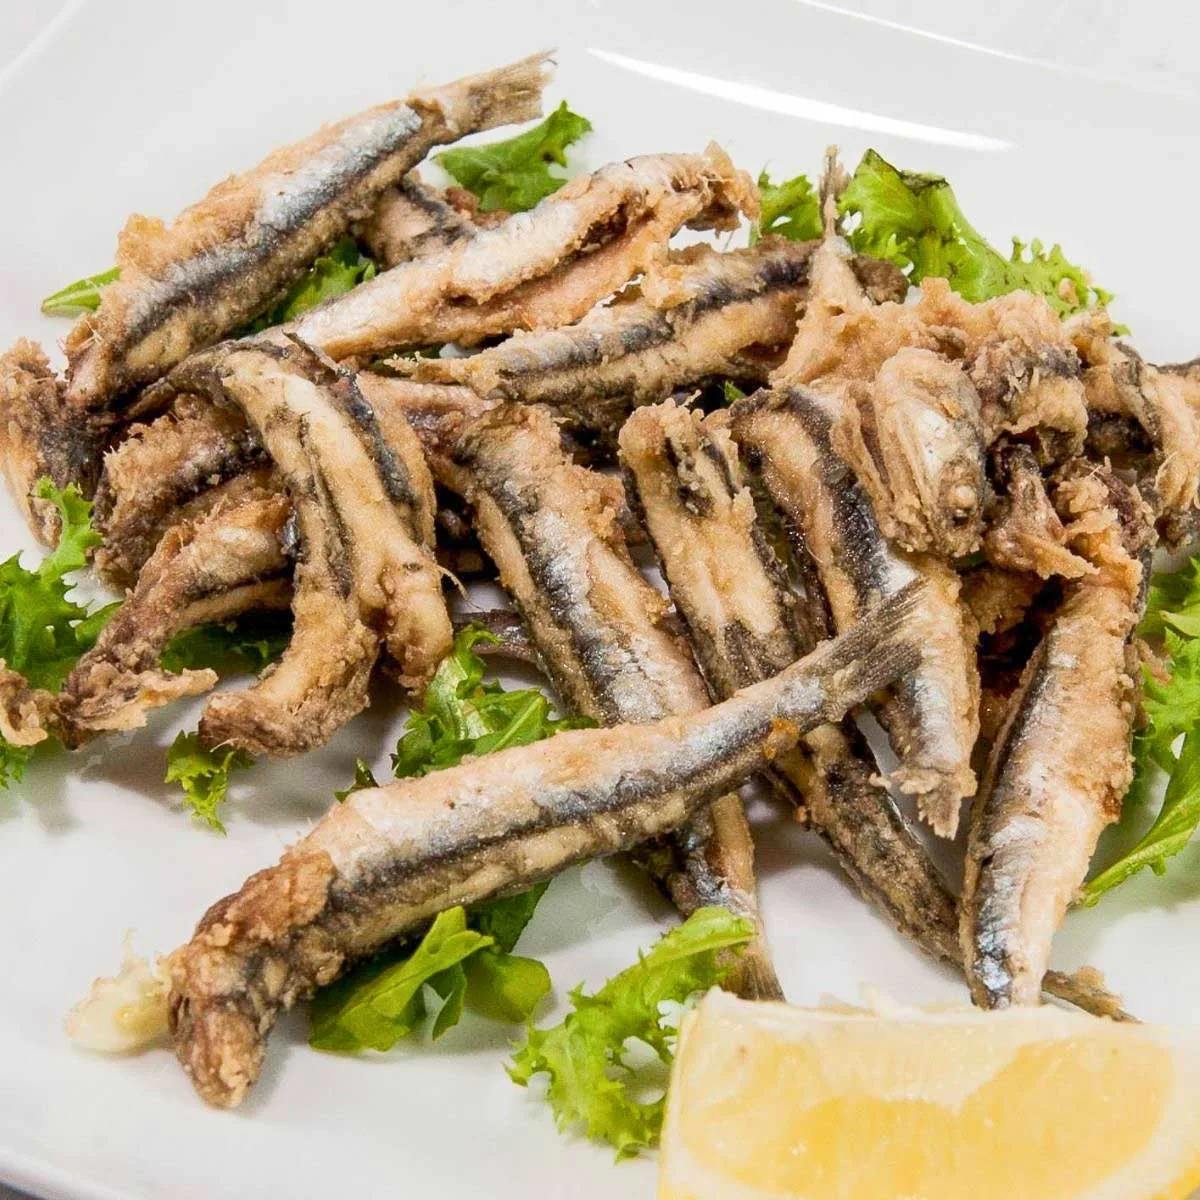 Plate of fried anchovies with lemon wedge